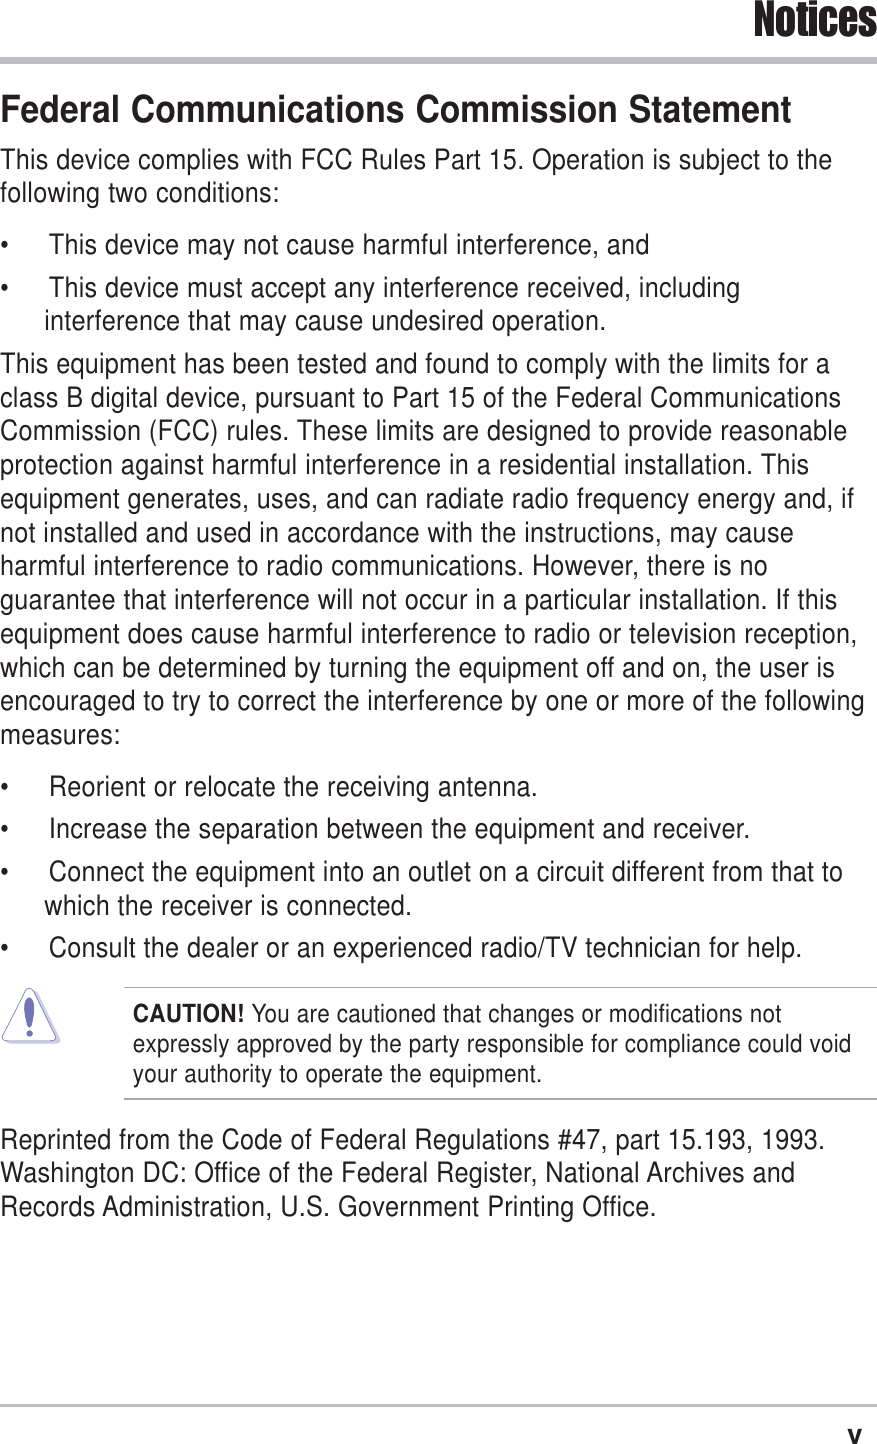 vNoticesFederal Communications Commission StatementThis device complies with FCC Rules Part 15. Operation is subject to thefollowing two conditions:• This device may not cause harmful interference, and• This device must accept any interference received, includinginterference that may cause undesired operation.This equipment has been tested and found to comply with the limits for aclass B digital device, pursuant to Part 15 of the Federal CommunicationsCommission (FCC) rules. These limits are designed to provide reasonableprotection against harmful interference in a residential installation. Thisequipment generates, uses, and can radiate radio frequency energy and, ifnot installed and used in accordance with the instructions, may causeharmful interference to radio communications. However, there is noguarantee that interference will not occur in a particular installation. If thisequipment does cause harmful interference to radio or television reception,which can be determined by turning the equipment off and on, the user isencouraged to try to correct the interference by one or more of the followingmeasures:• Reorient or relocate the receiving antenna.• Increase the separation between the equipment and receiver.• Connect the equipment into an outlet on a circuit different from that towhich the receiver is connected.• Consult the dealer or an experienced radio/TV technician for help.CAUTION! You are cautioned that changes or modifications notexpressly approved by the party responsible for compliance could voidyour authority to operate the equipment.Reprinted from the Code of Federal Regulations #47, part 15.193, 1993.Washington DC: Office of the Federal Register, National Archives andRecords Administration, U.S. Government Printing Office.